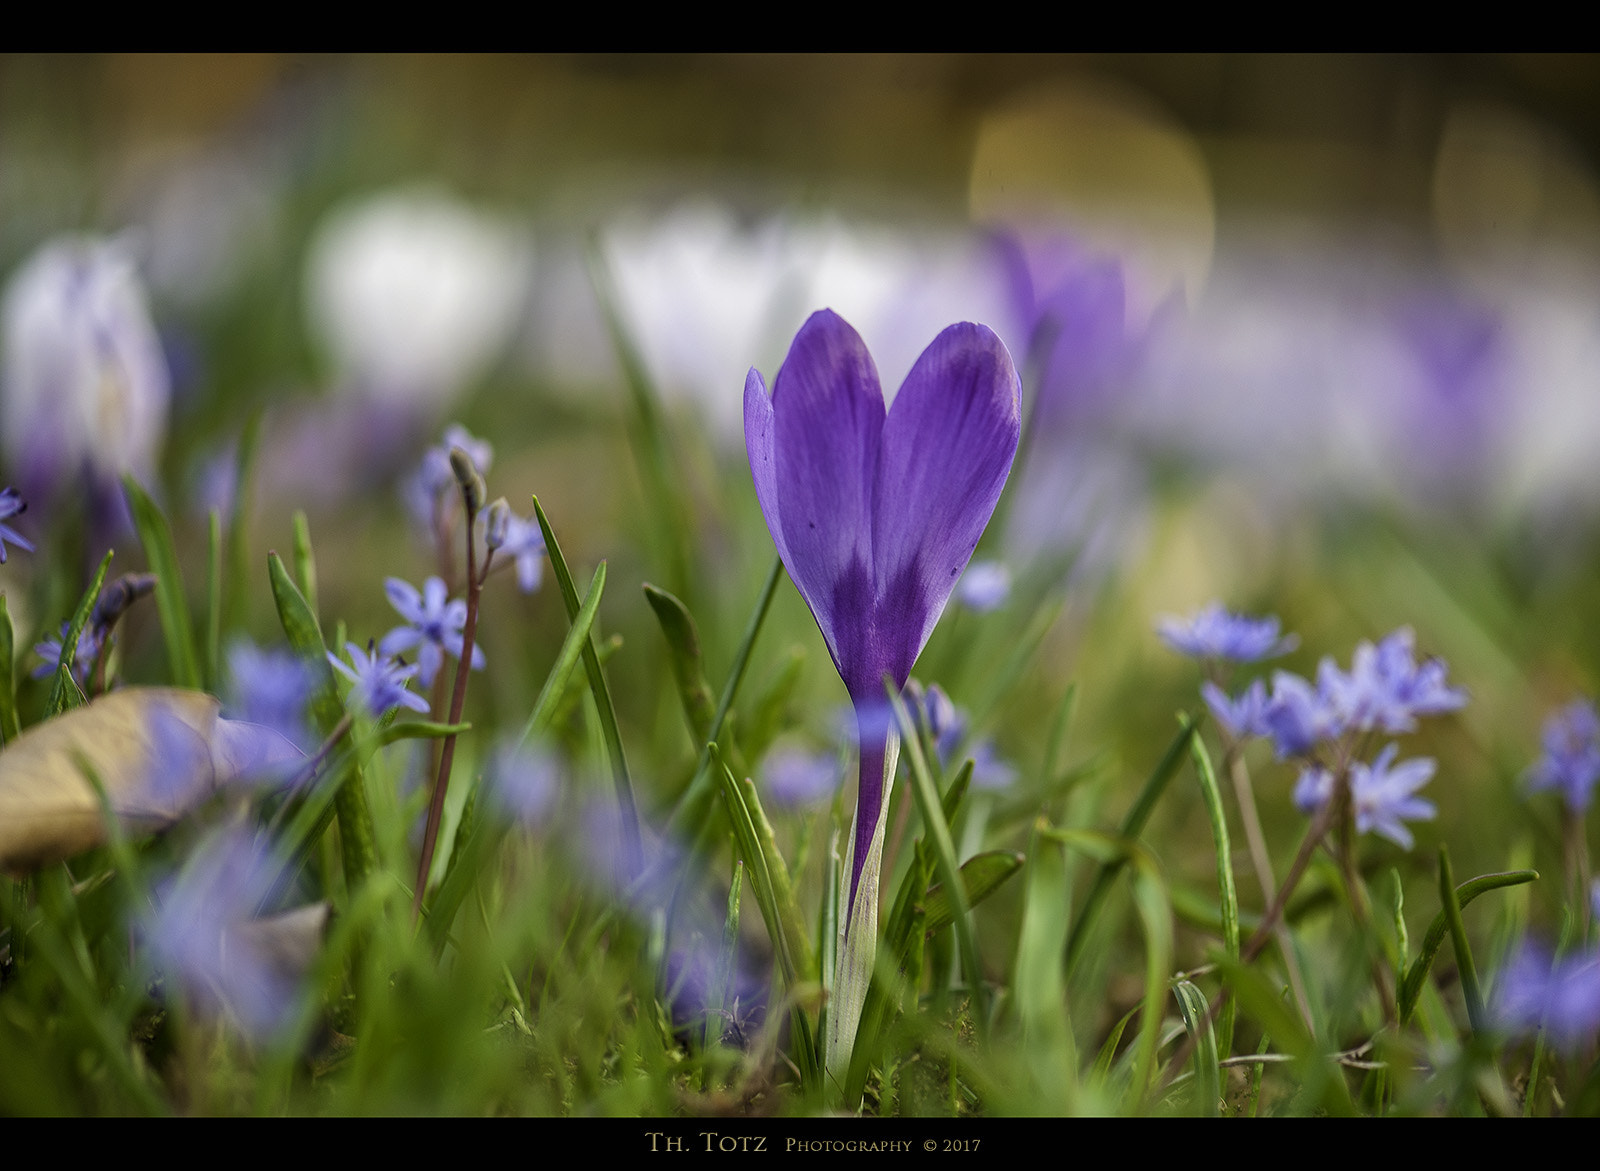 Nikon D700 + Nikon AF-S Micro-Nikkor 105mm F2.8G IF-ED VR sample photo. Crocuses in the grass photography